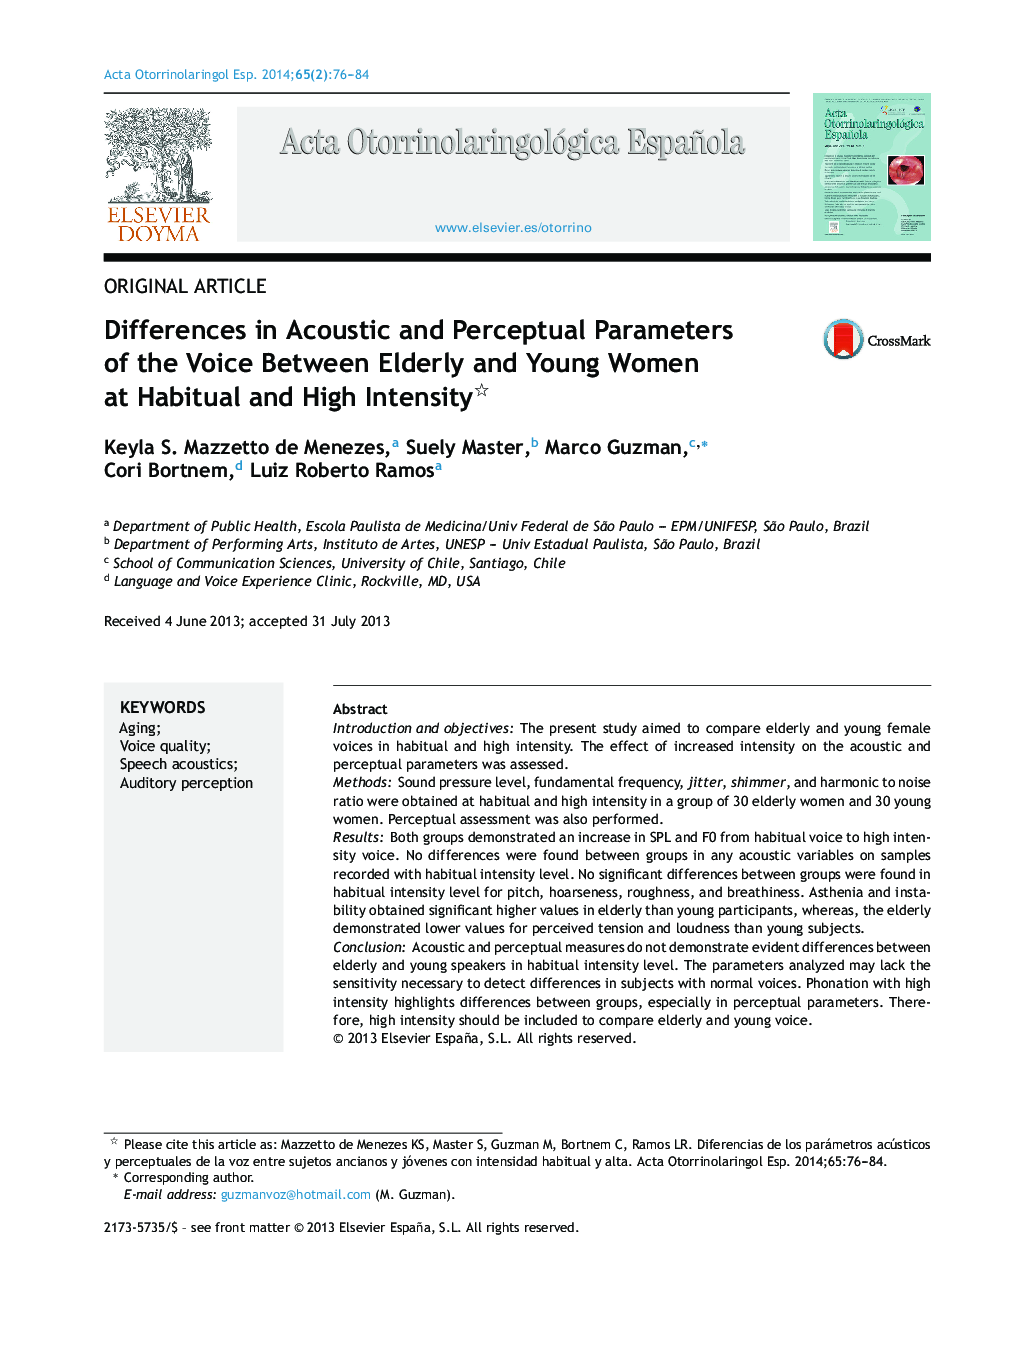 Differences in Acoustic and Perceptual Parameters of the Voice Between Elderly and Young Women at Habitual and High Intensity 